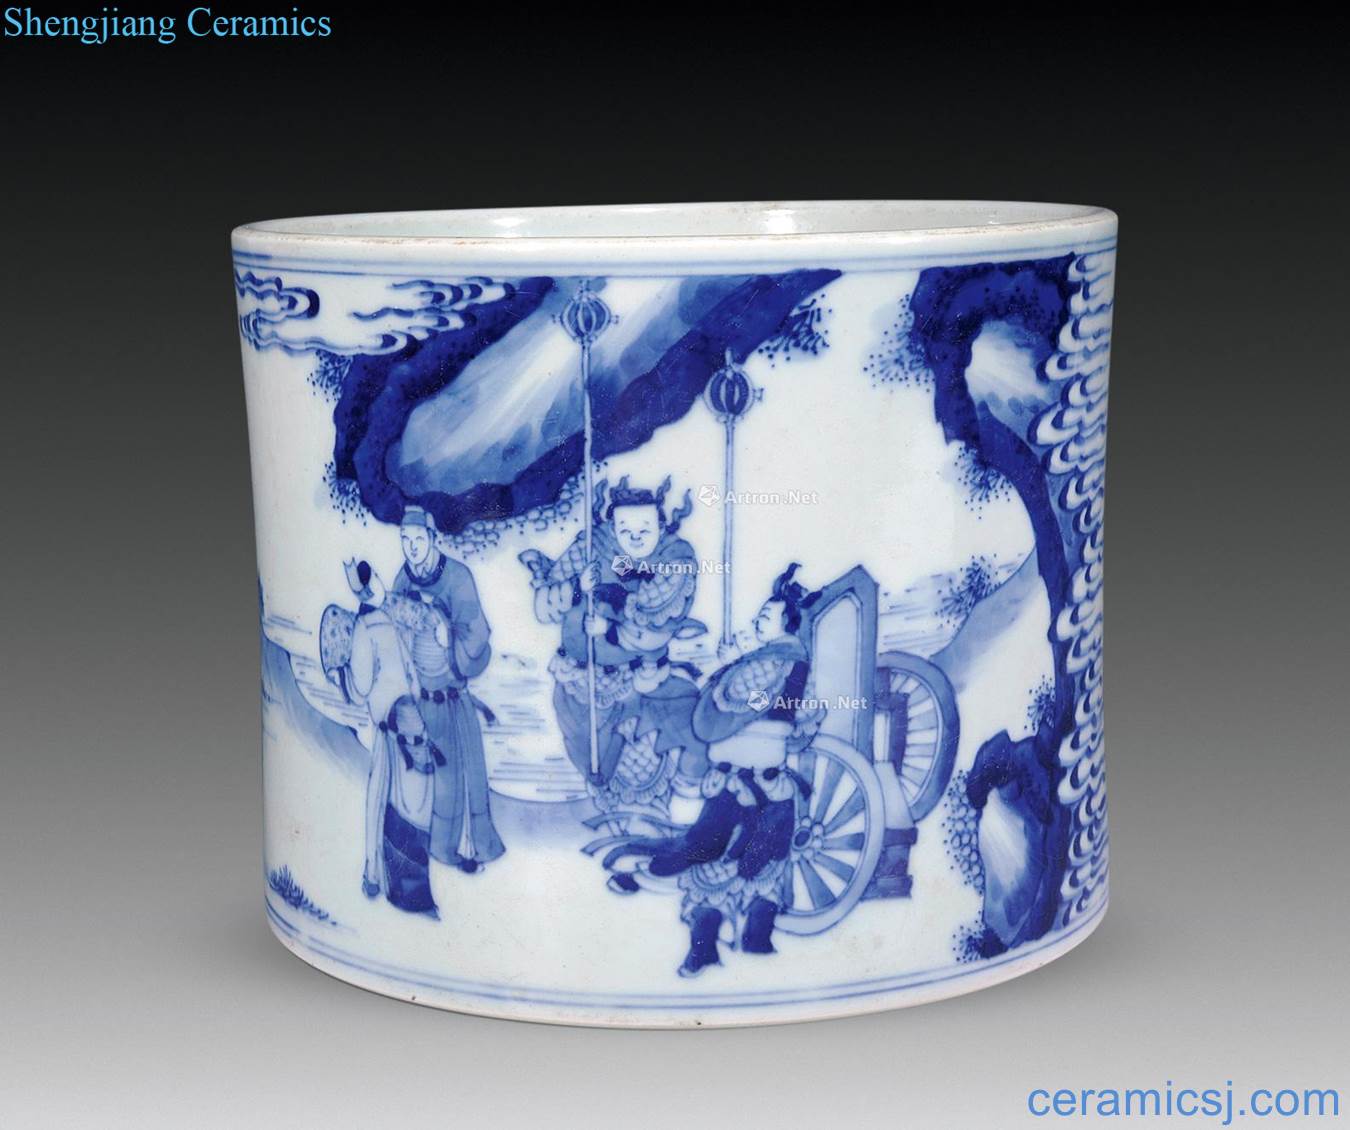 In the 18th century Blue and white Wen Wangfang xian pen container